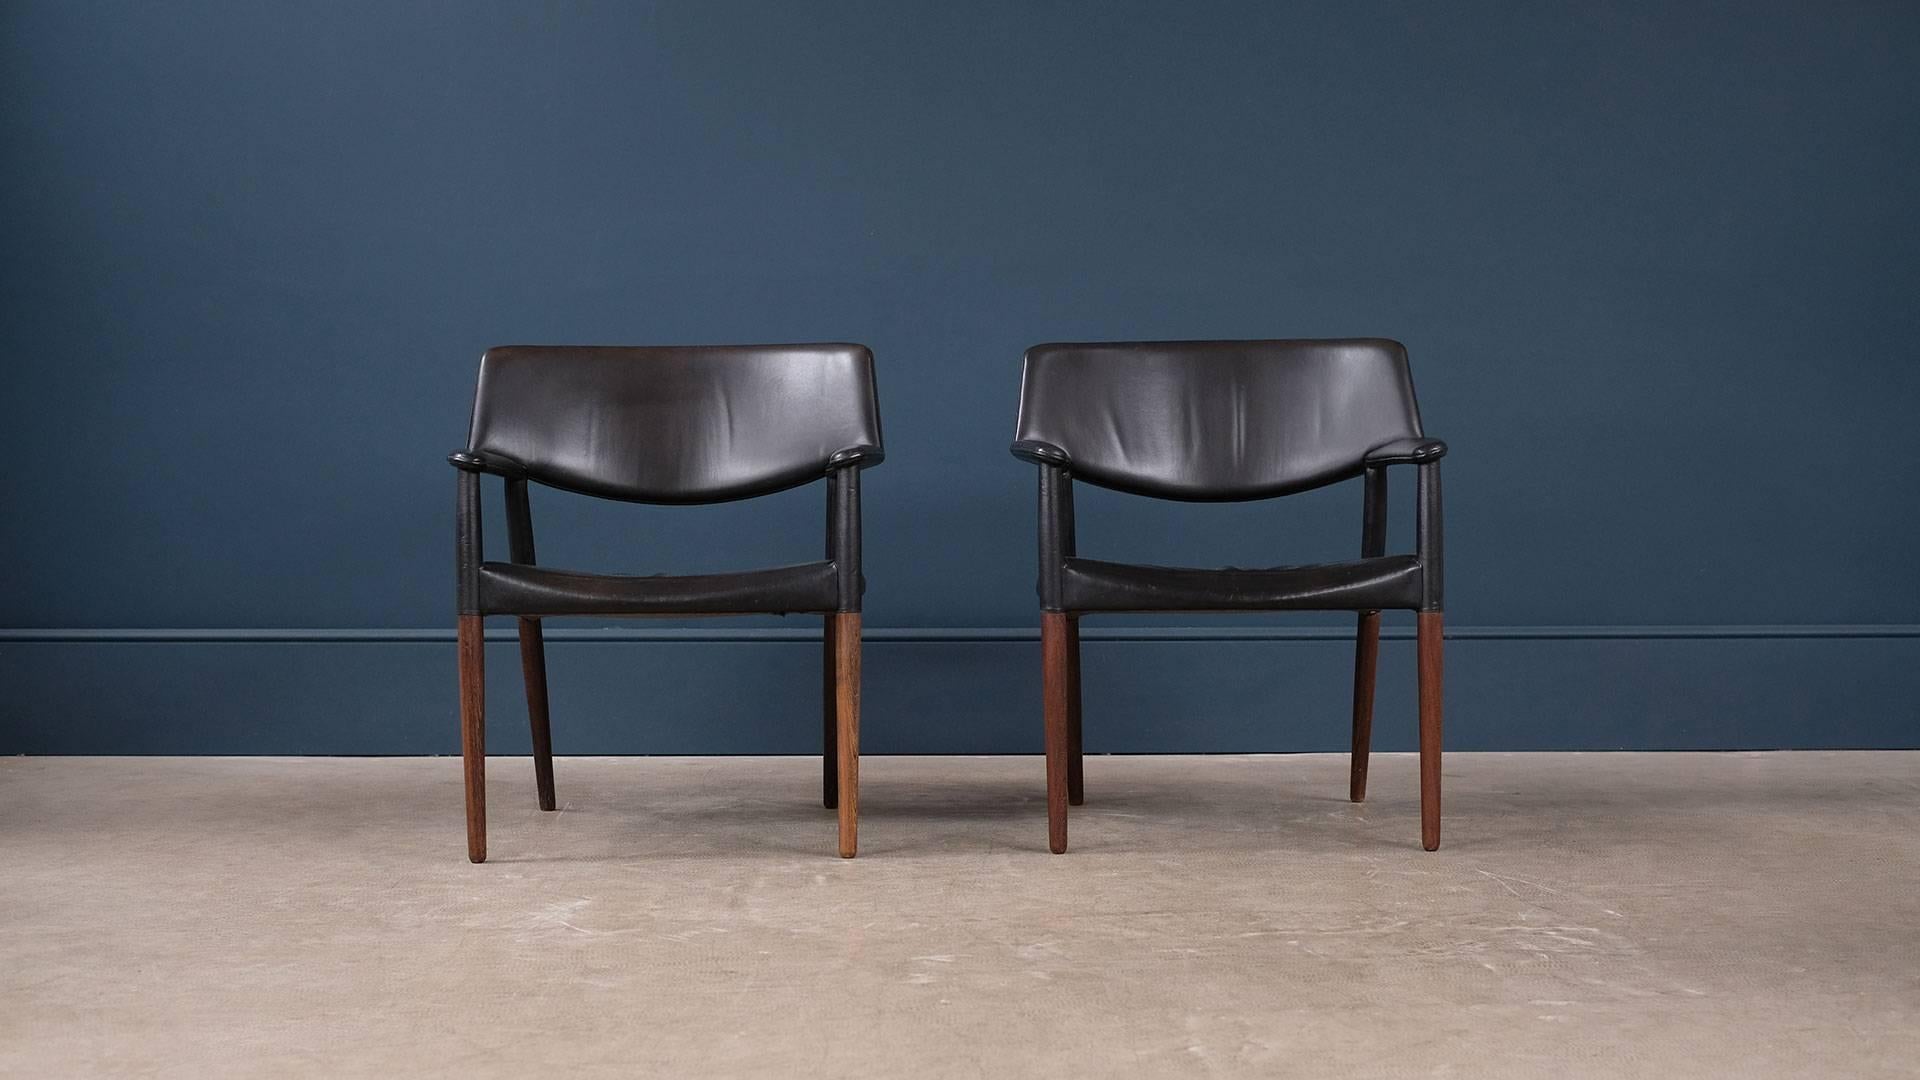 Monumental pair of chairs in solid wenge wood and original leather designed by architects Ejner Larsen & Aksel Bender Madsen and produced by master cabinetmaker Willy Beck, Denmark. Very elegant and grand chairs.